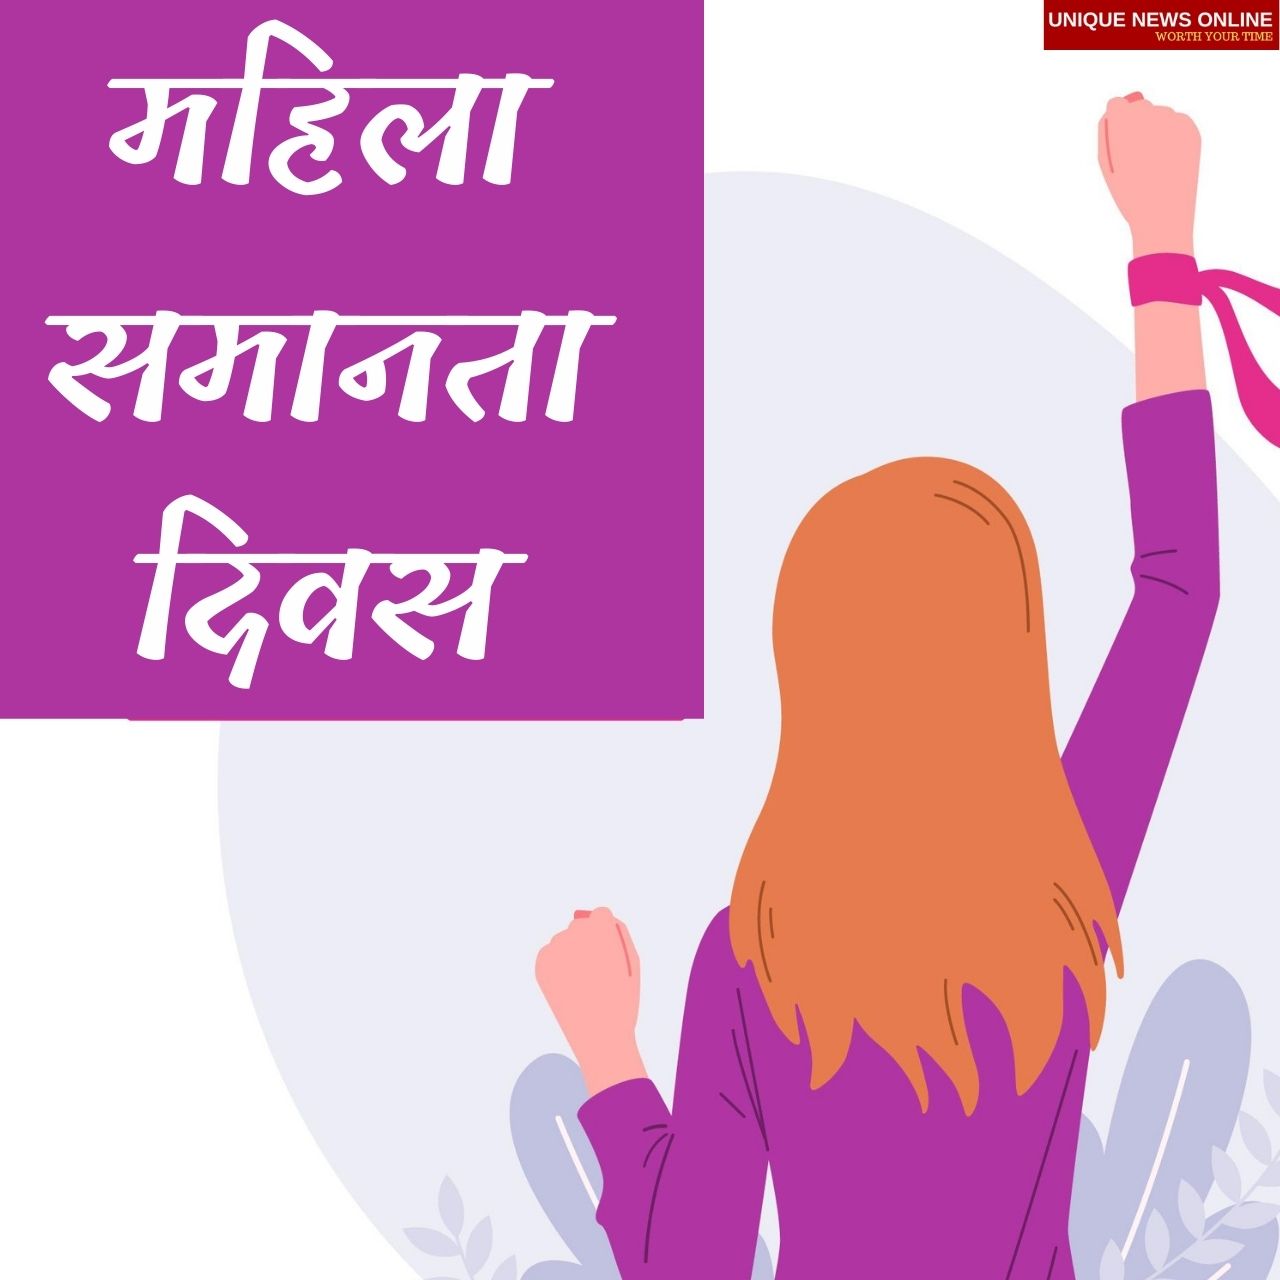 Women's Equality Day 2021 Hindi Quotes, Images, Messages, Wishes, and Greetings to share